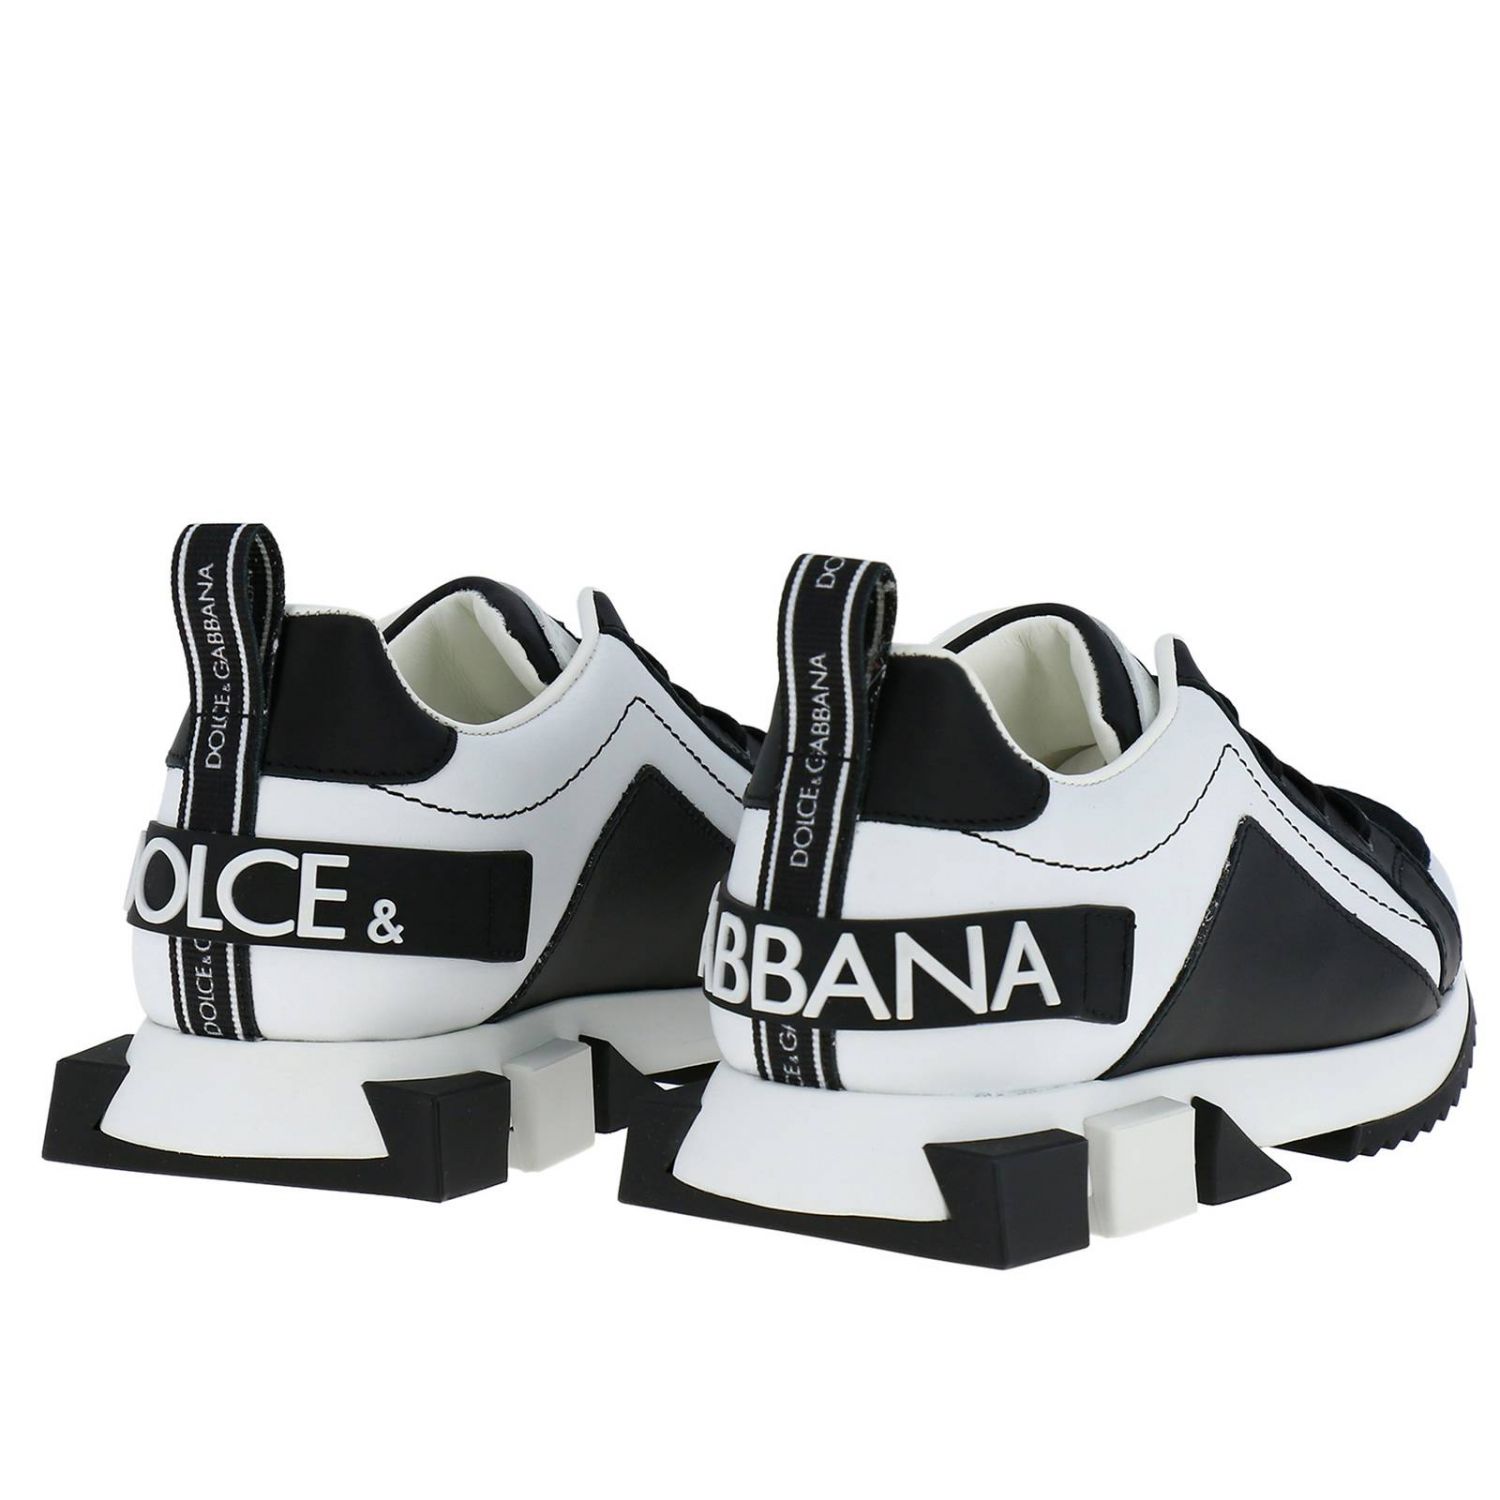 toddler dolce and gabbana shoes